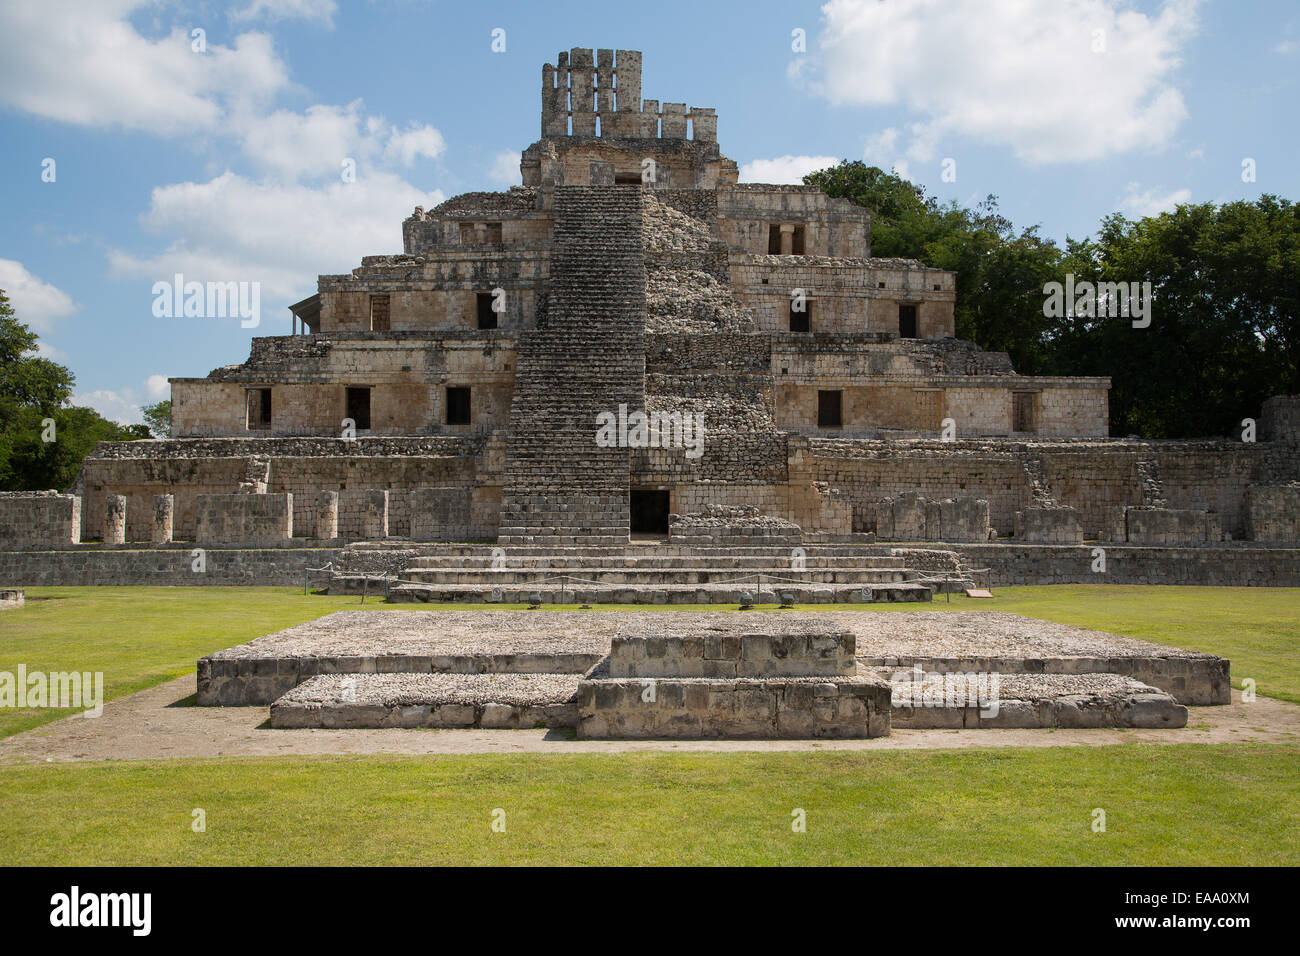 The Edzna Mayan Archaeological site in Campeche, Mexico Stock Photo